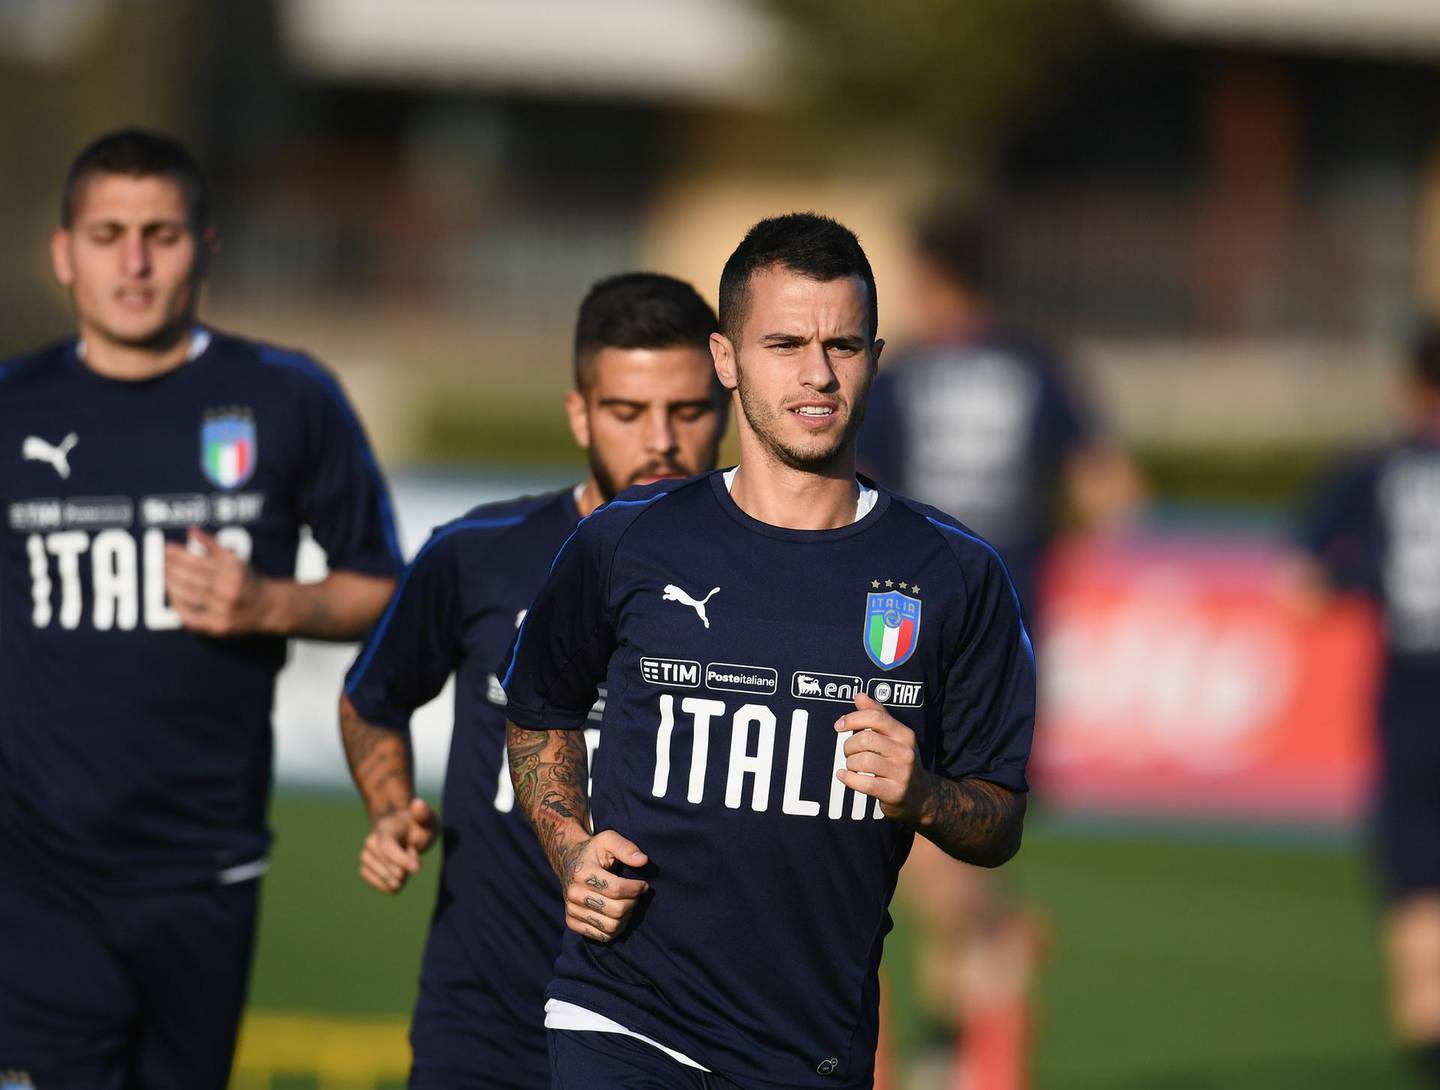 FLORENCE, ITALY - OCTOBER 12:  Sebastian Giovinco of Italy looks on during a Italy training session at Centro Tecnico Federale di Coverciano on October 12, 2018 in Florence, Italy.  (Photo by Claudio Villa/Getty Images)